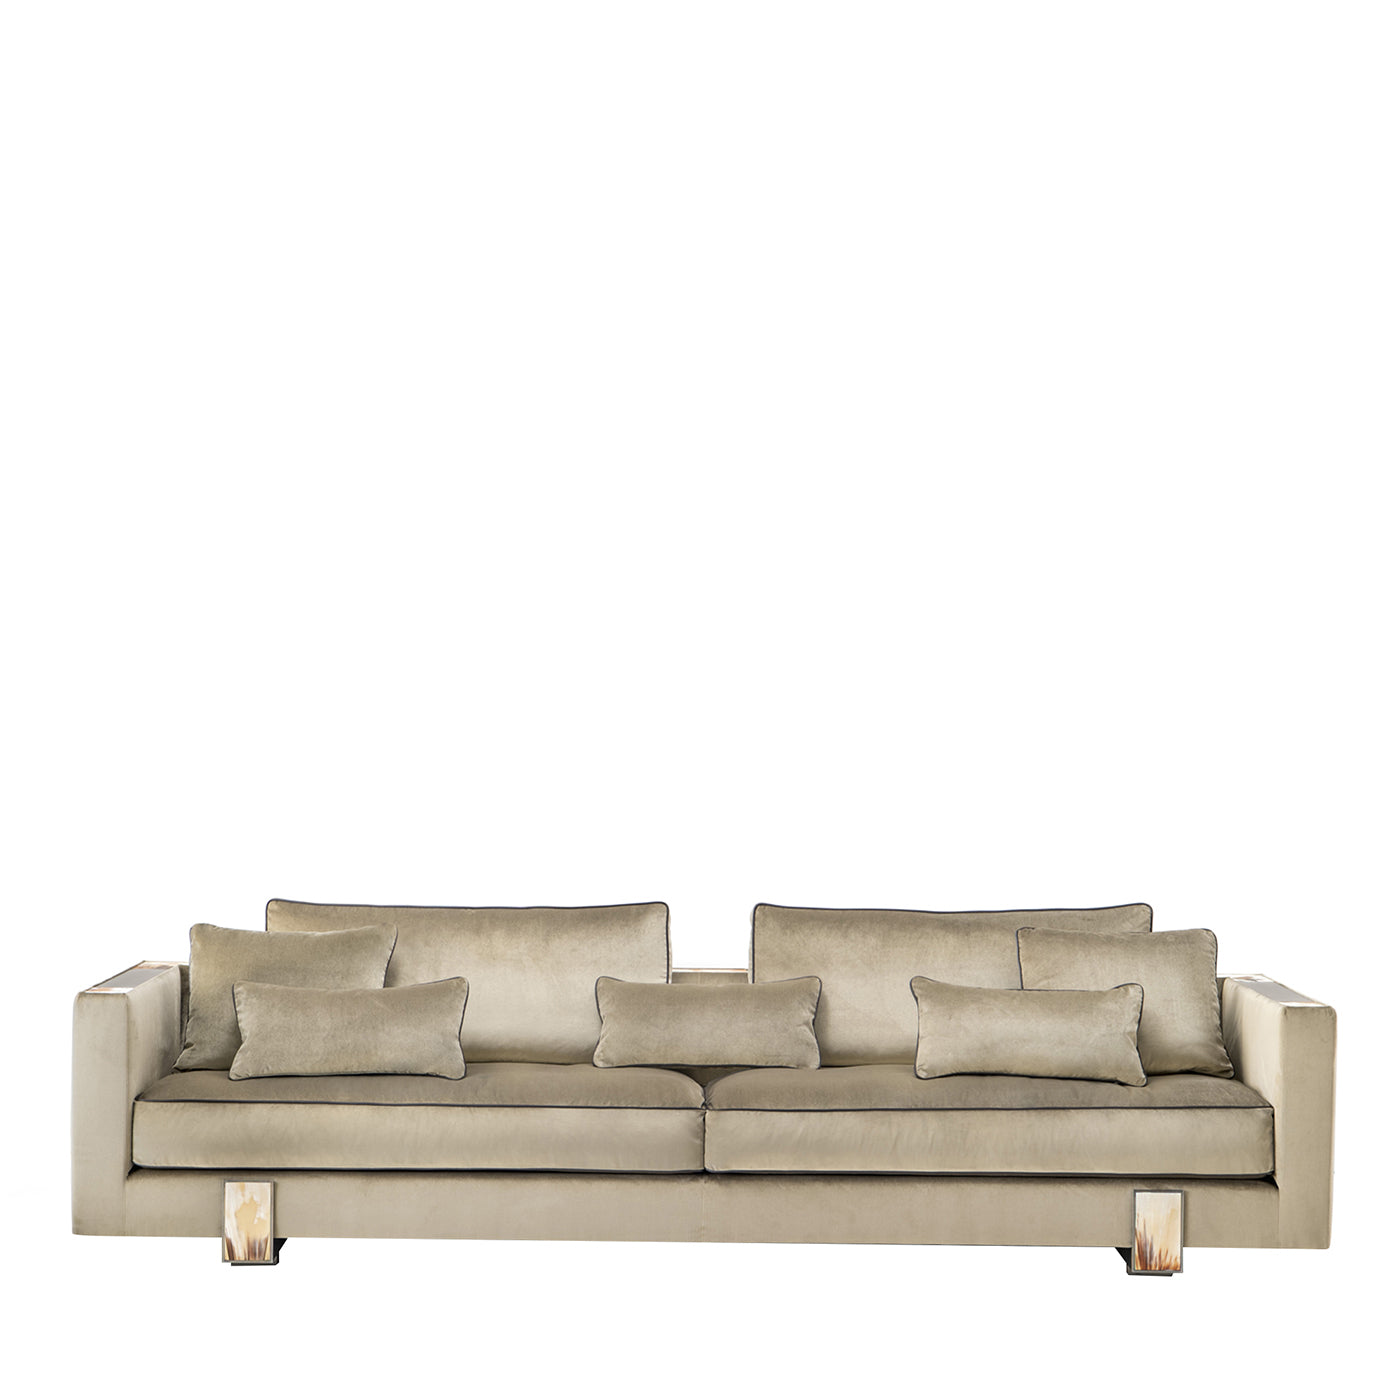 Adriano 4-Seater Beige Sofa with Horn Inlays - Main view